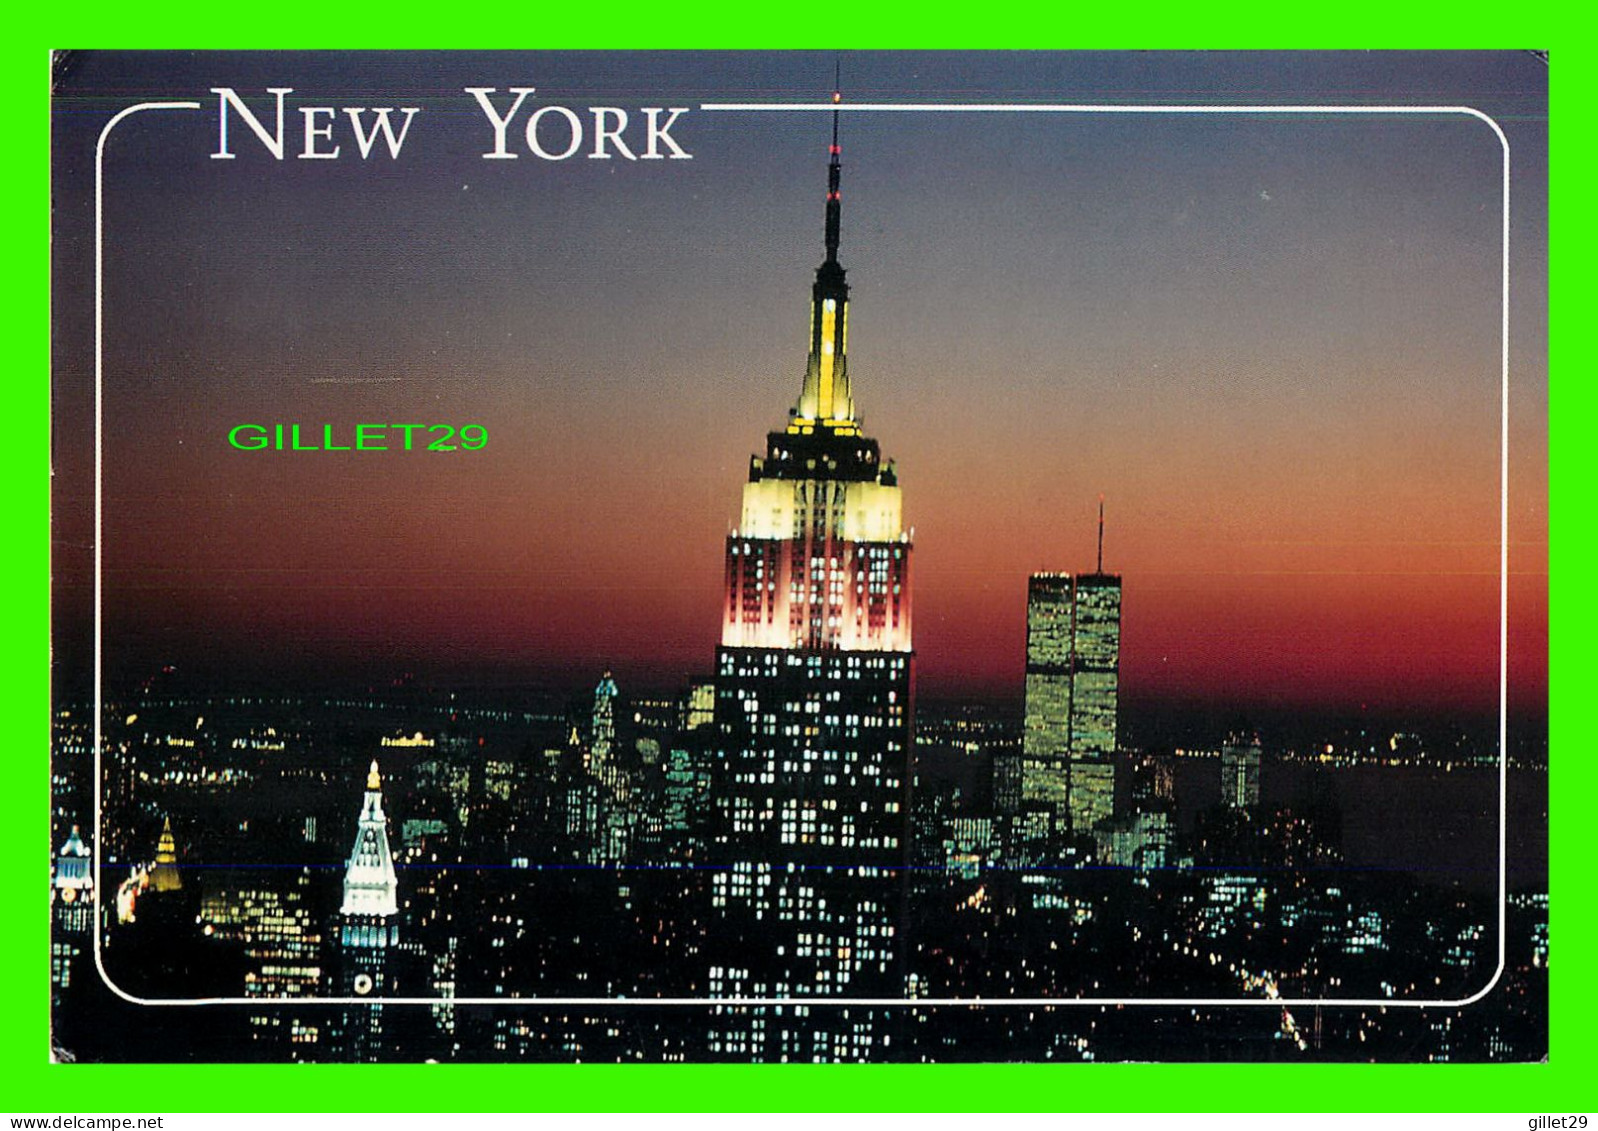 NEW YORK CITY, NY - NIGHT VIEW - ALAN SCHEIN - CITY VISIONS POST CARDS - - Viste Panoramiche, Panorama